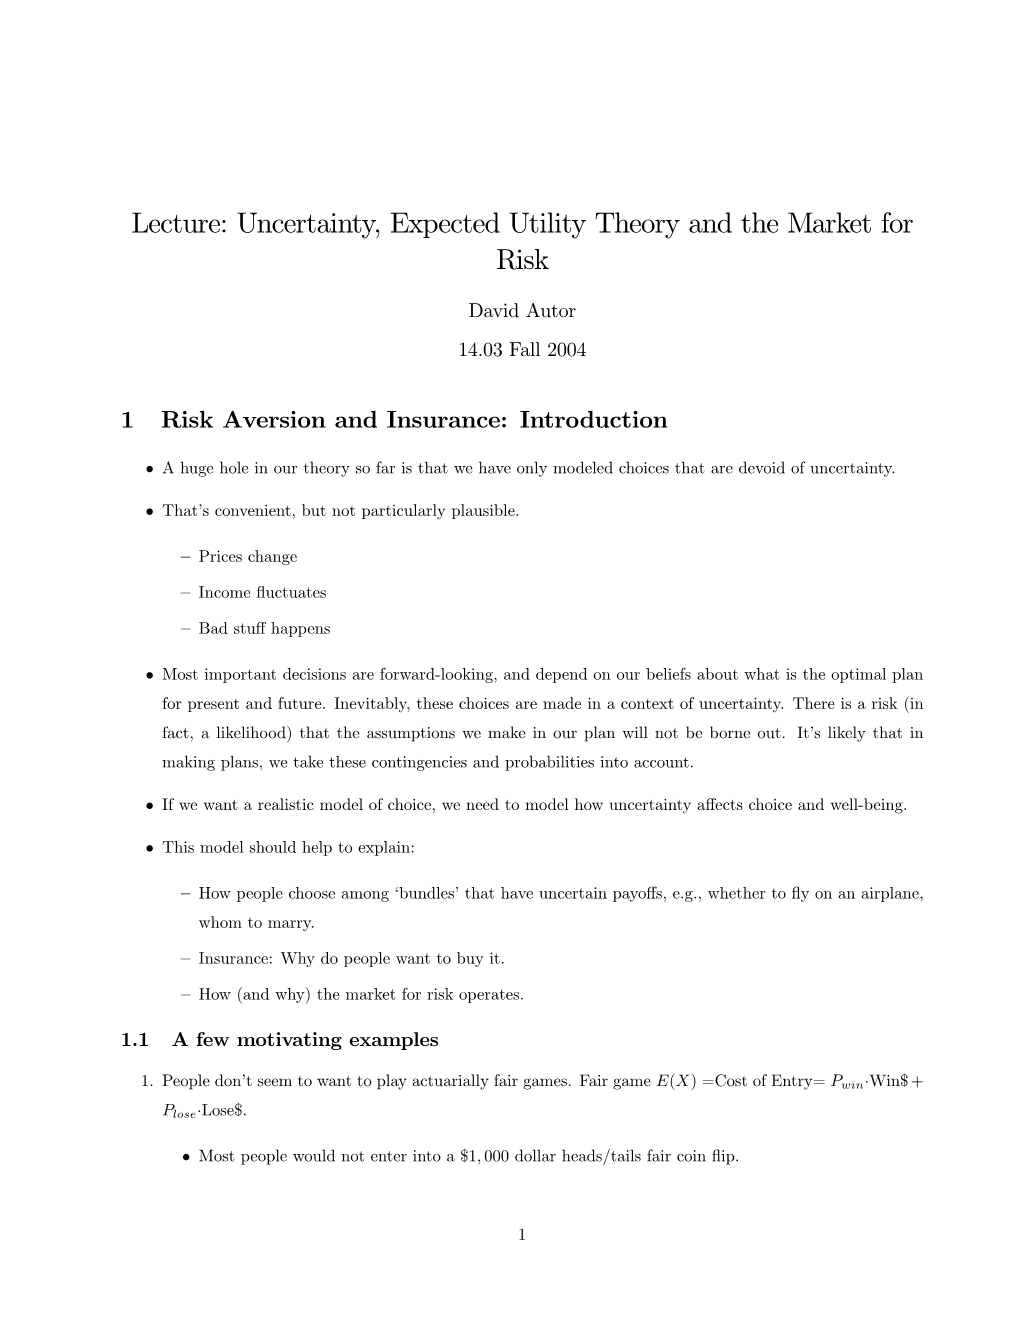 Lecture: Uncertainty, Expected Utility Theory and the Market for Risk